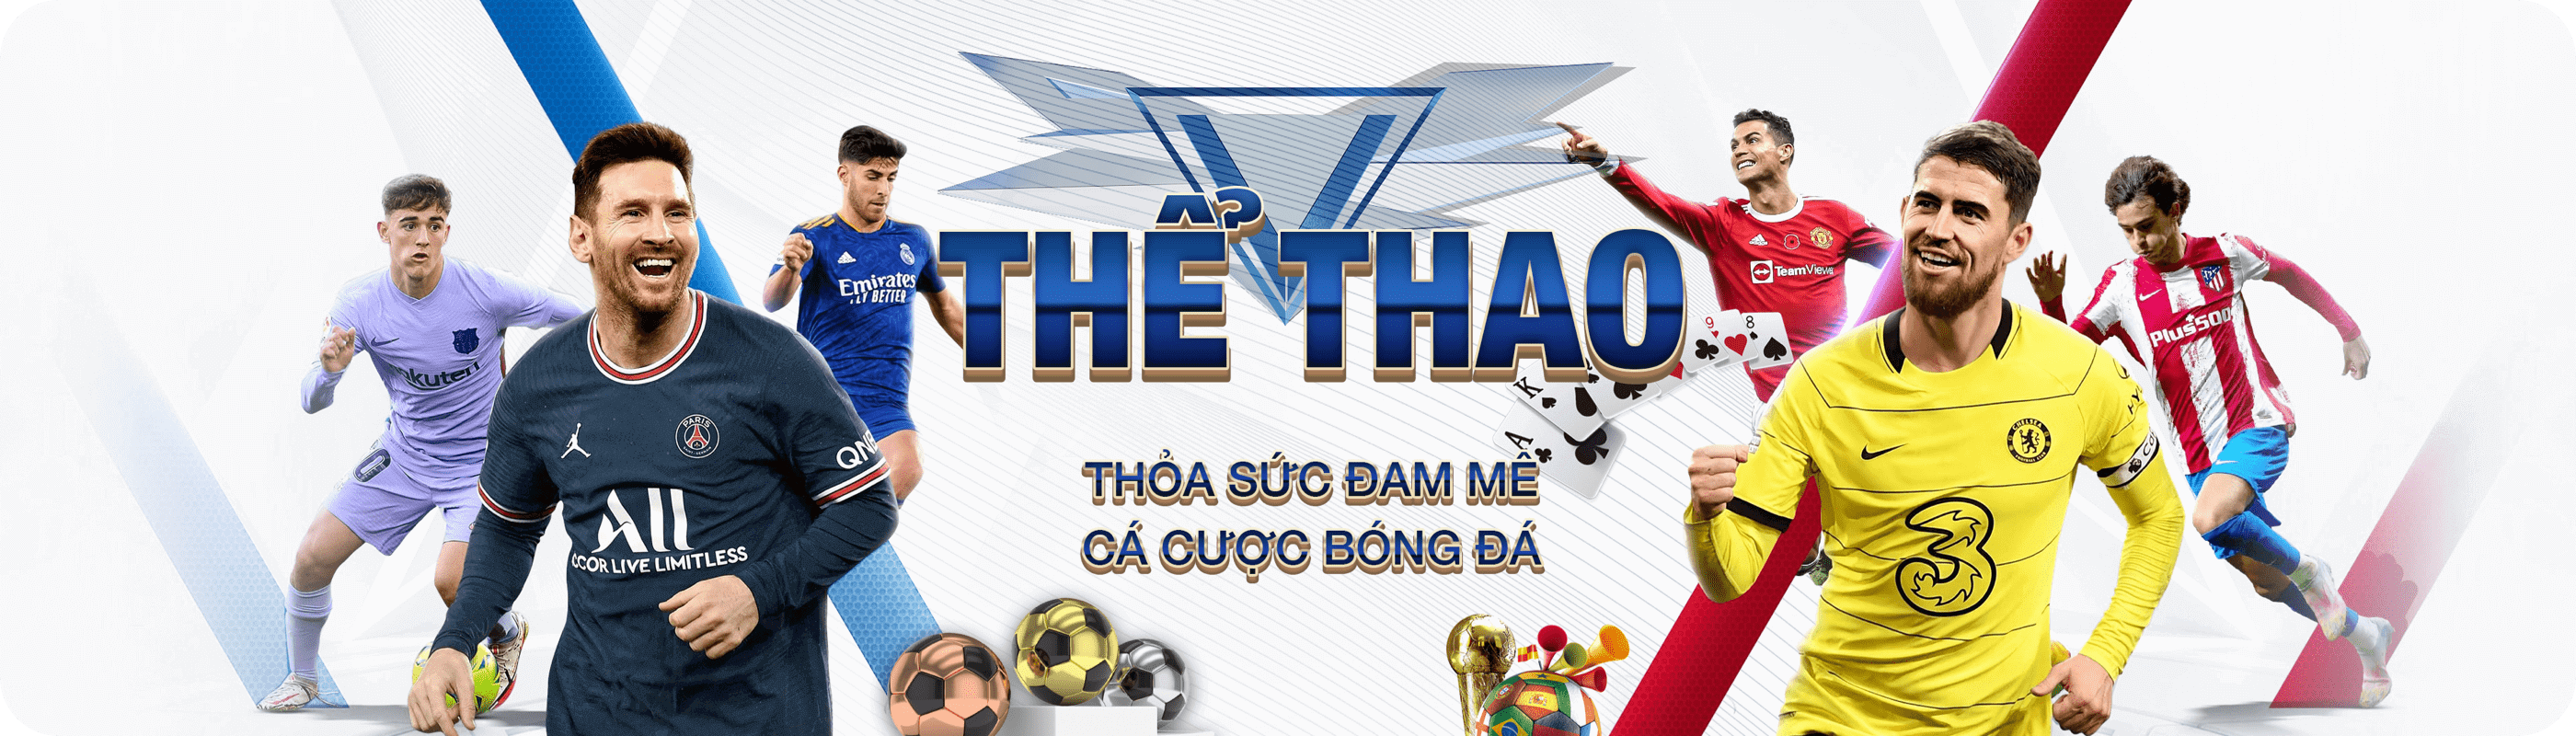 Banner sảnh thể thao